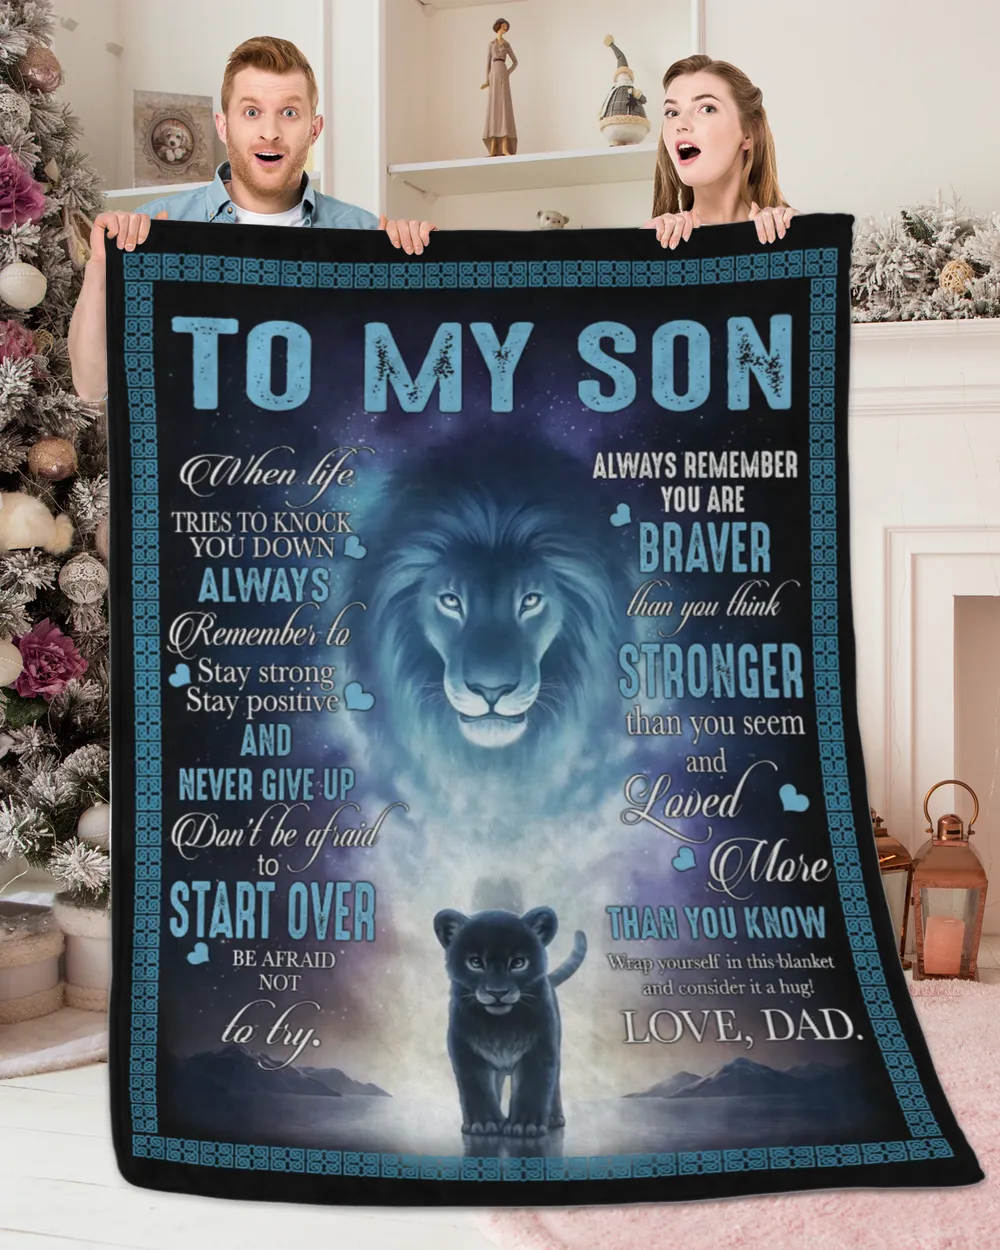 To my son - Gift for son